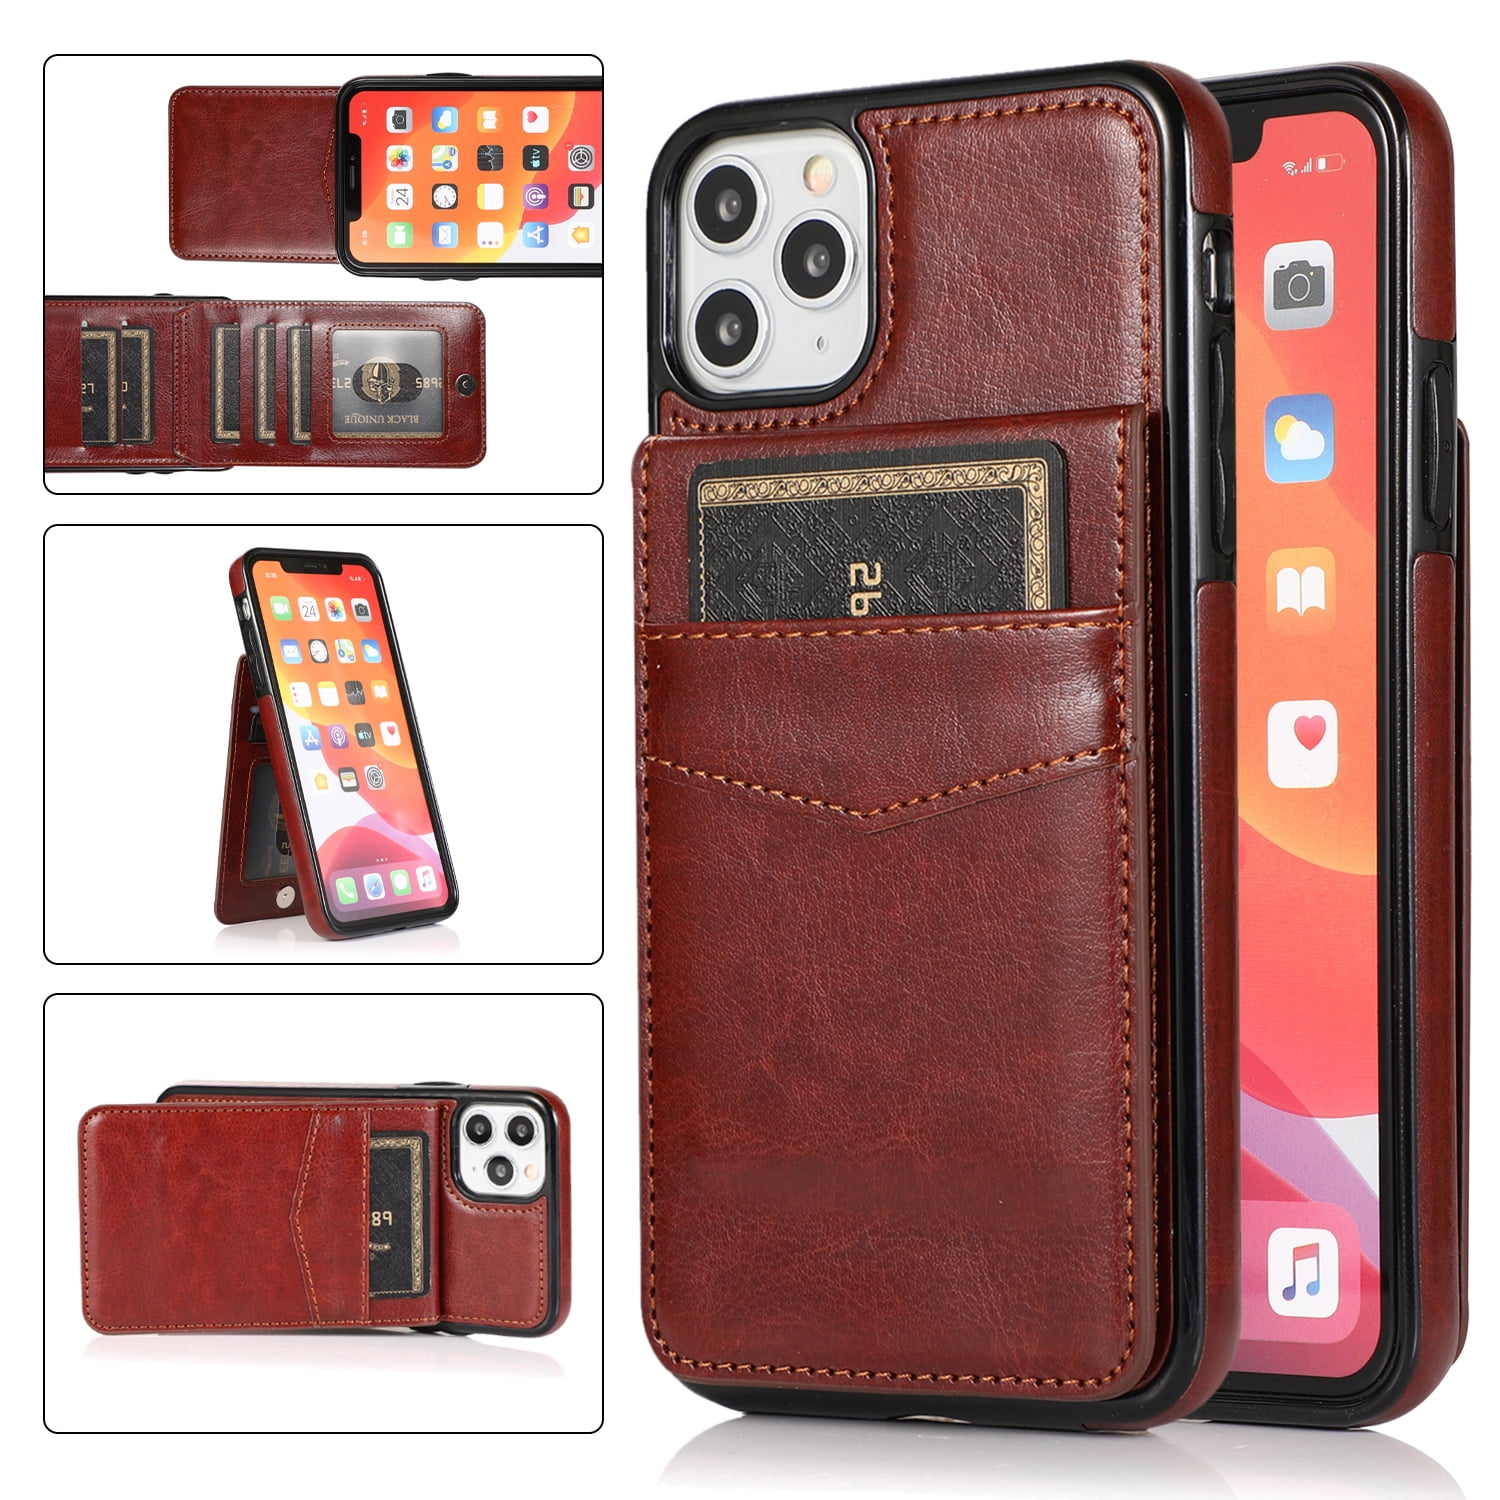 iPhone 11 Wallet Case with Card Holder,OT ONETOP PU Leather Kickstand Card  Slots Case,Double Magnetic Clasp and Durable Shockproof Cover for iPhone 11